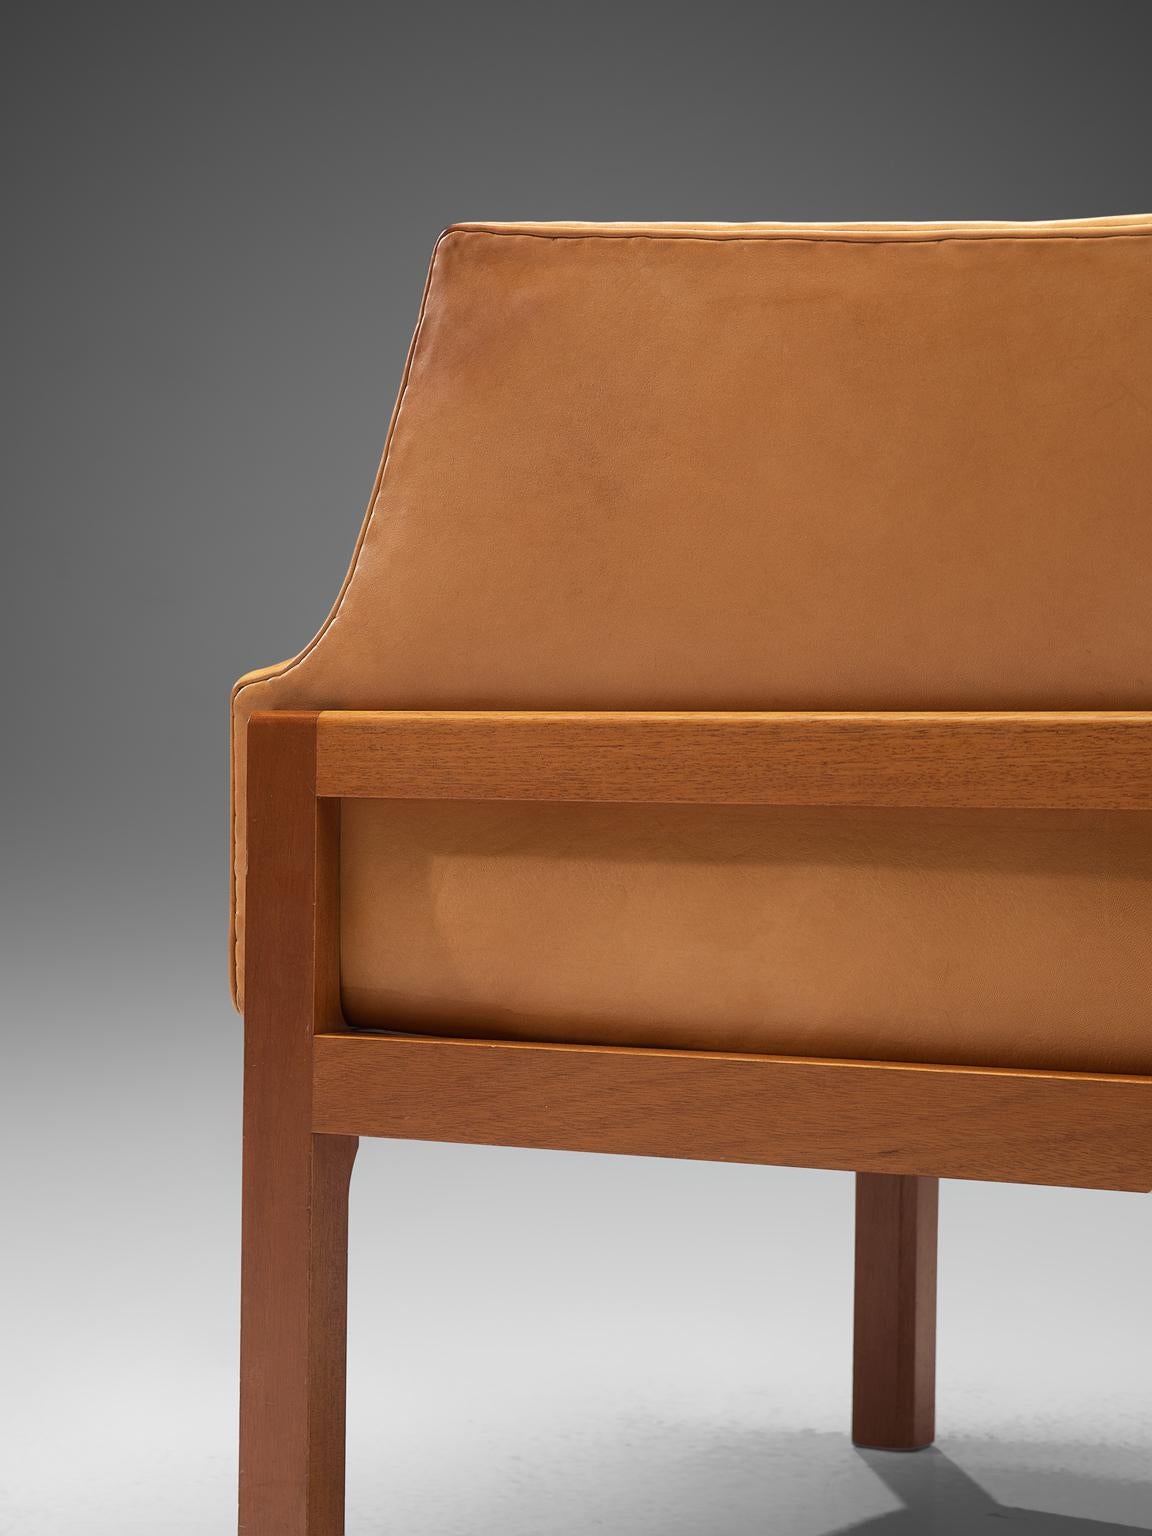 Mid-20th Century Mogens Koch Wingback Chair and Ottoman in Mahogany and Cognac Leather